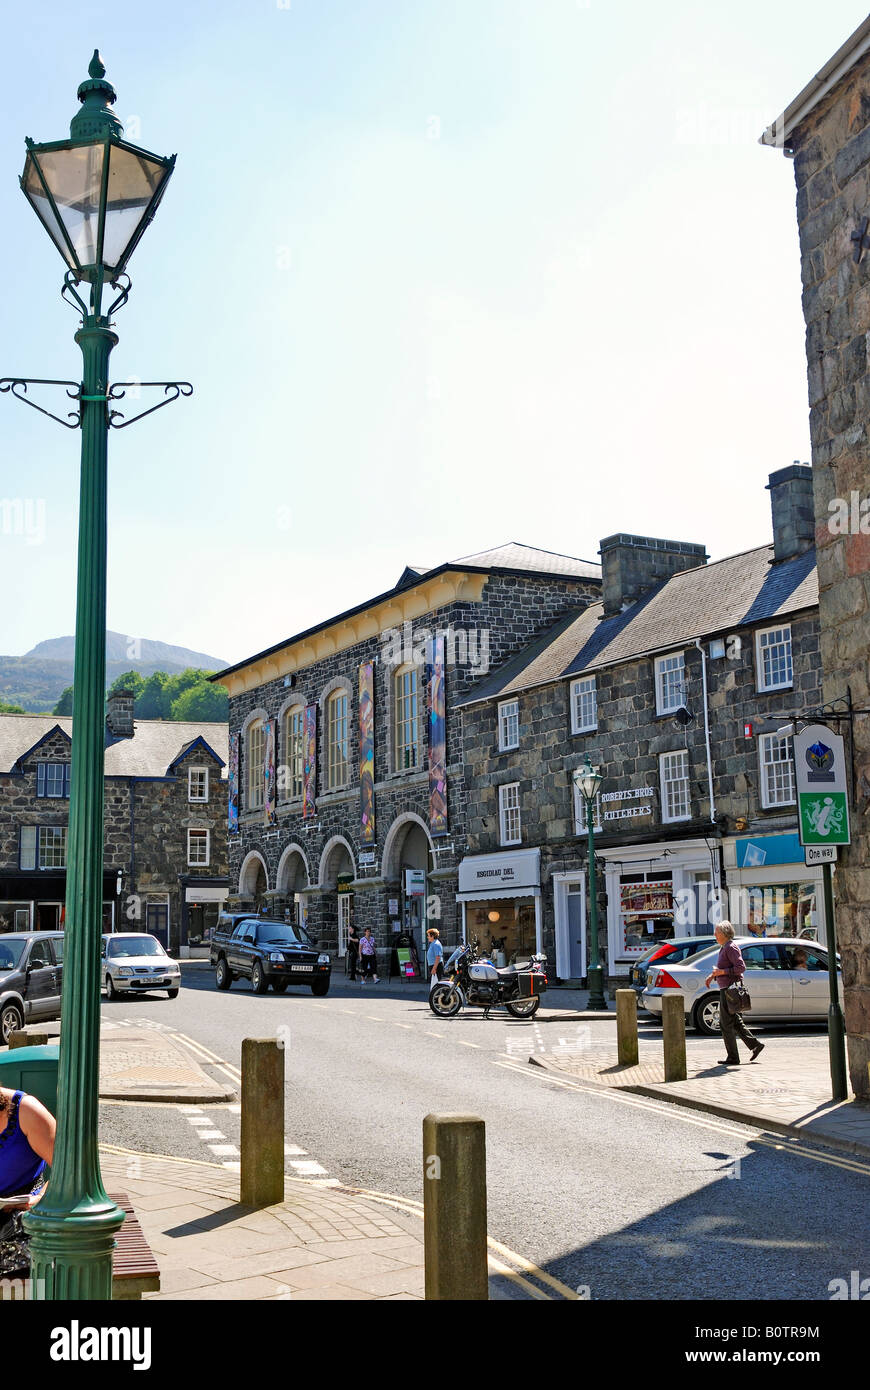 OLD STONE BUILDINGS AND SHOPS IN MARKET SQUARE DOLGELLAU GWYNEDD WALES Stock Photo